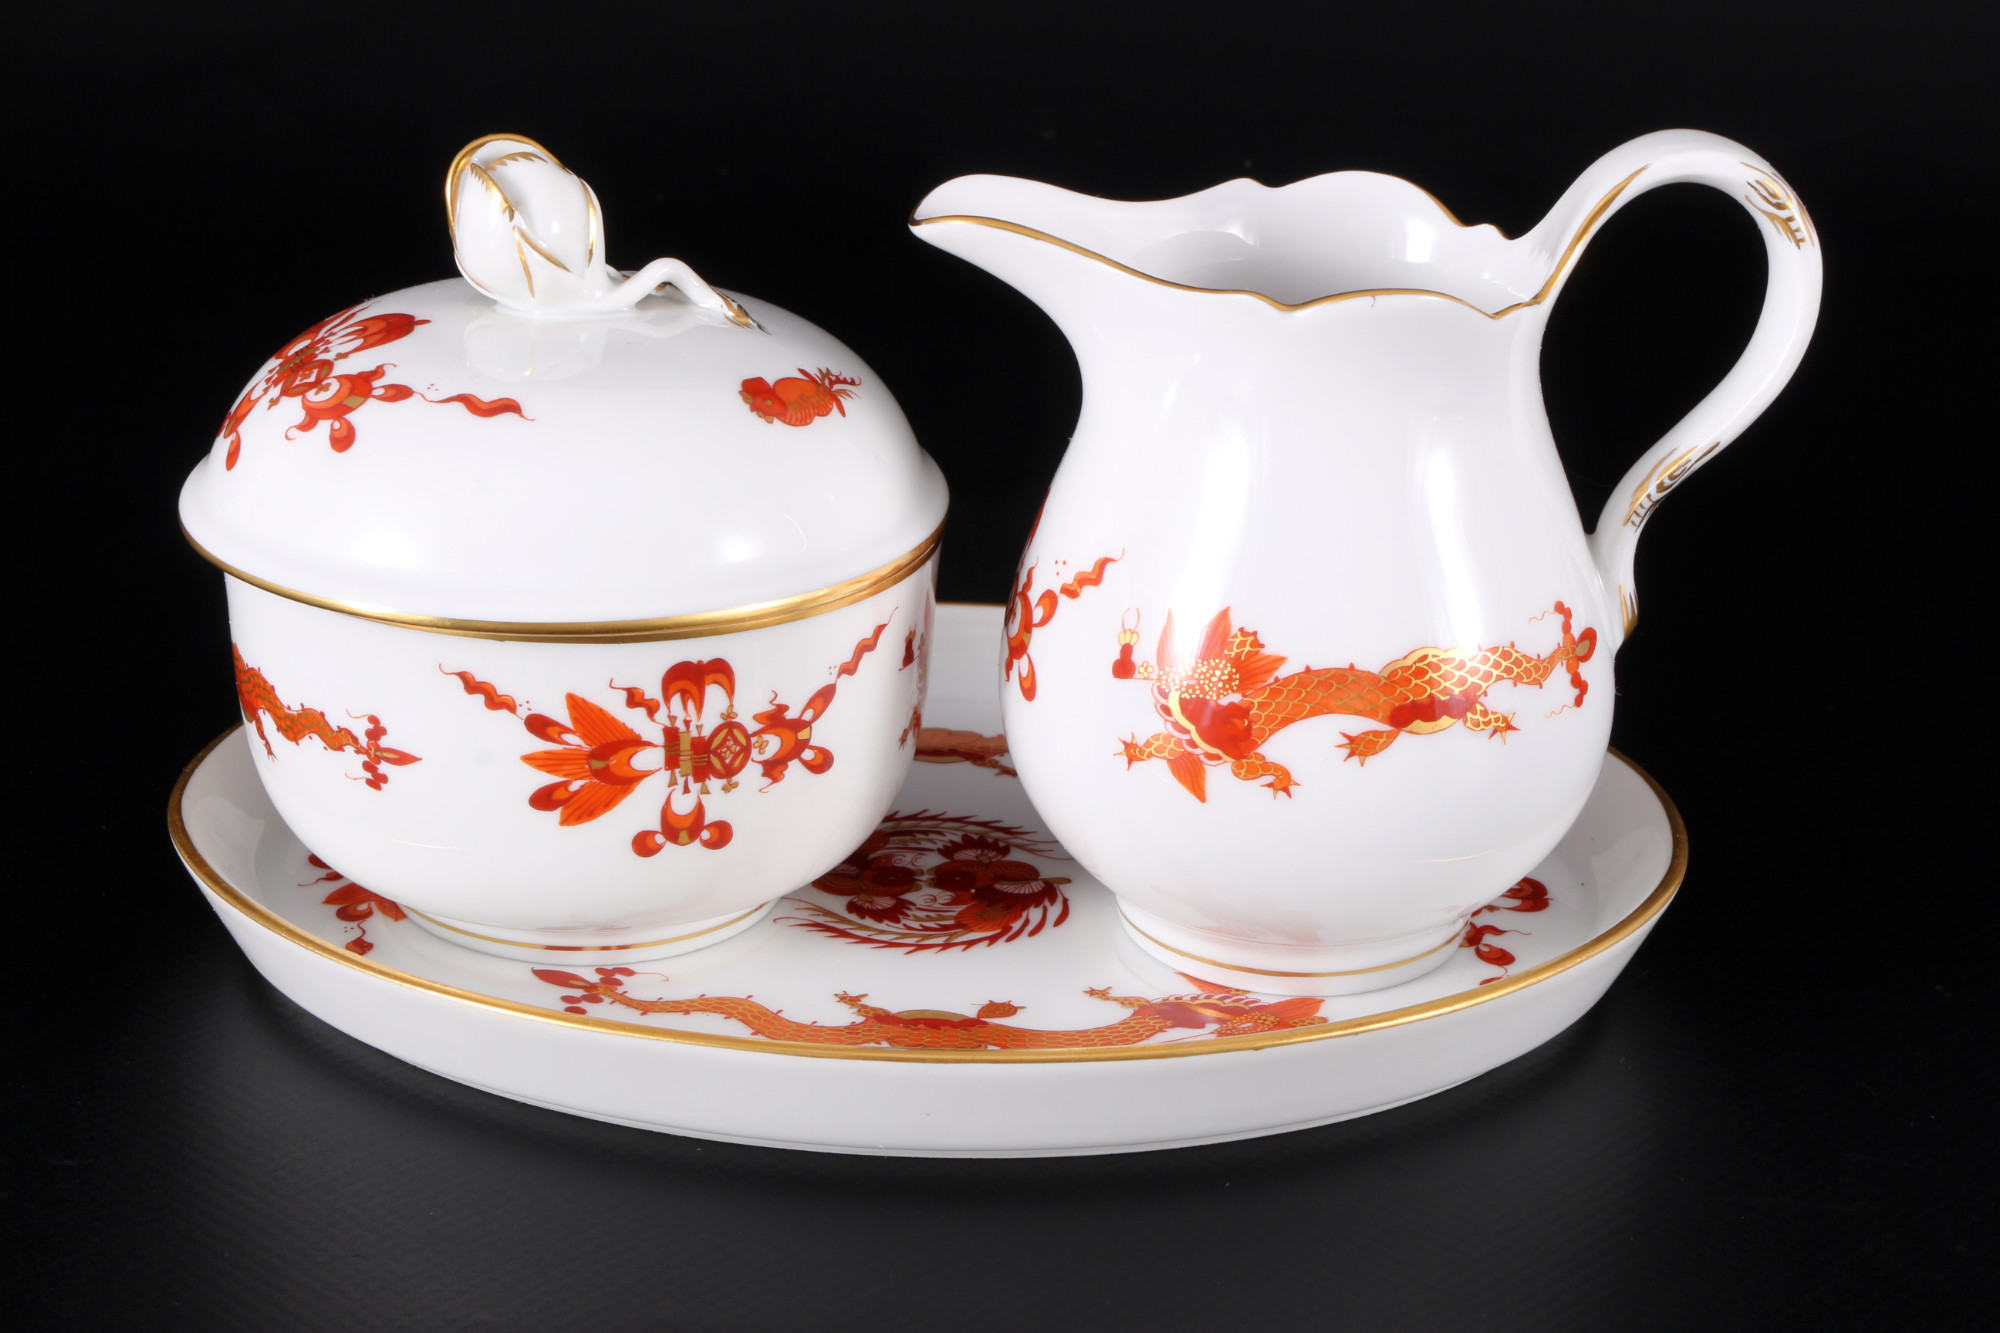 Meissen Red Court Dragon Rich coffee service for 6 persons 1st choice, Kaffeeservice für 6 Personen  - Image 4 of 6